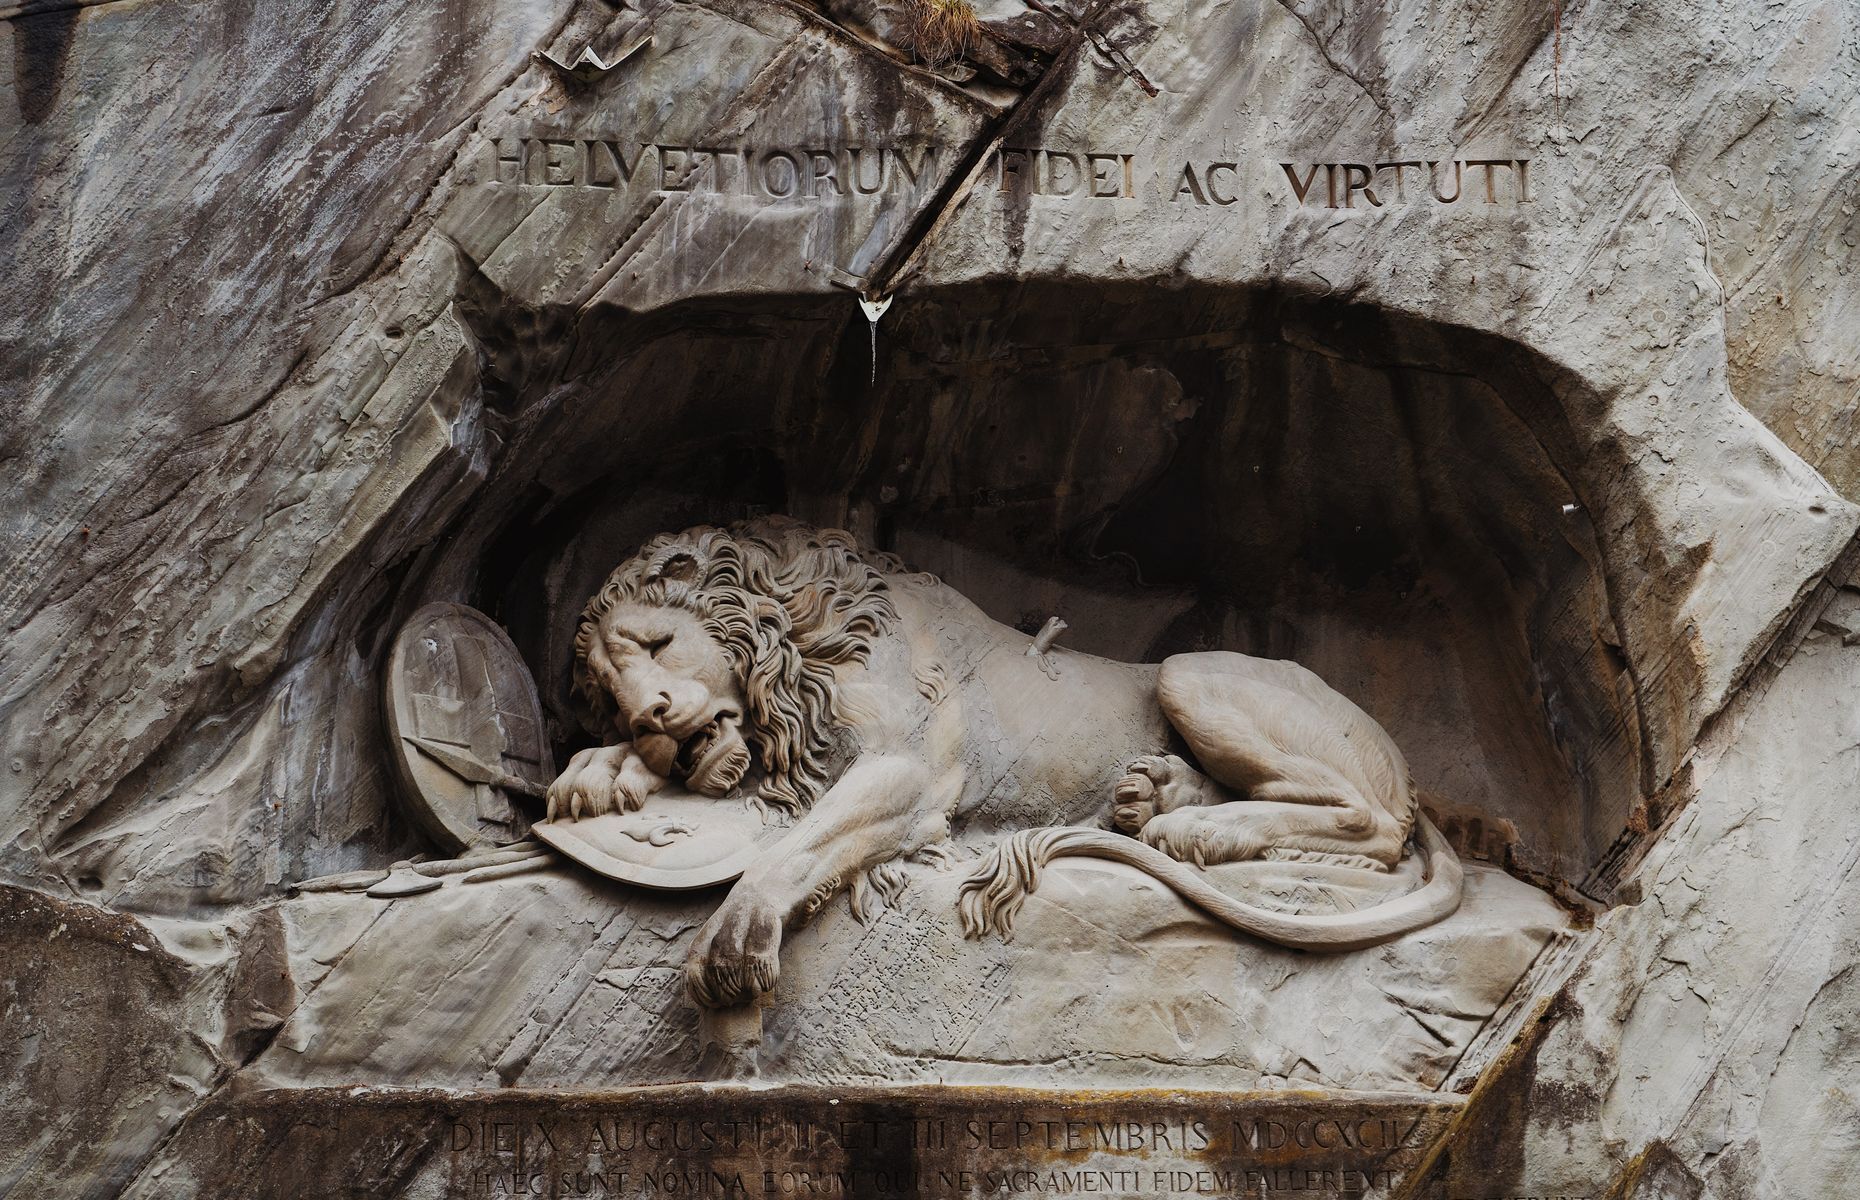 <p>Nestled into a rocky grotto, <a href="https://www.myswitzerland.com/en-ca/experiences/lion-monument/" title="https://www.myswitzerland.com/en-ca/experiences/lion-monument/">the Lion Monument</a> sculpture was first unveiled in 1821 and commemorates the Swiss guardsmen who died in the 1792 French Revolution. While it’s a popular attraction in Lucerne, many visitors of the monument deplore that it’s not near anything else of interest, with <a href="https://www.tripadvisor.com/ShowUserReviews-g188064-d522810-r673484777-Lion_Monument-Lucerne.html" title="https://www.tripadvisor.com/ShowUserReviews-g188064-d522810-r673484777-Lion_Monument-Lucerne.html">one tourist adding</a> that it’s “nothing special” and “not really worth going out of the way” to see it.</p>